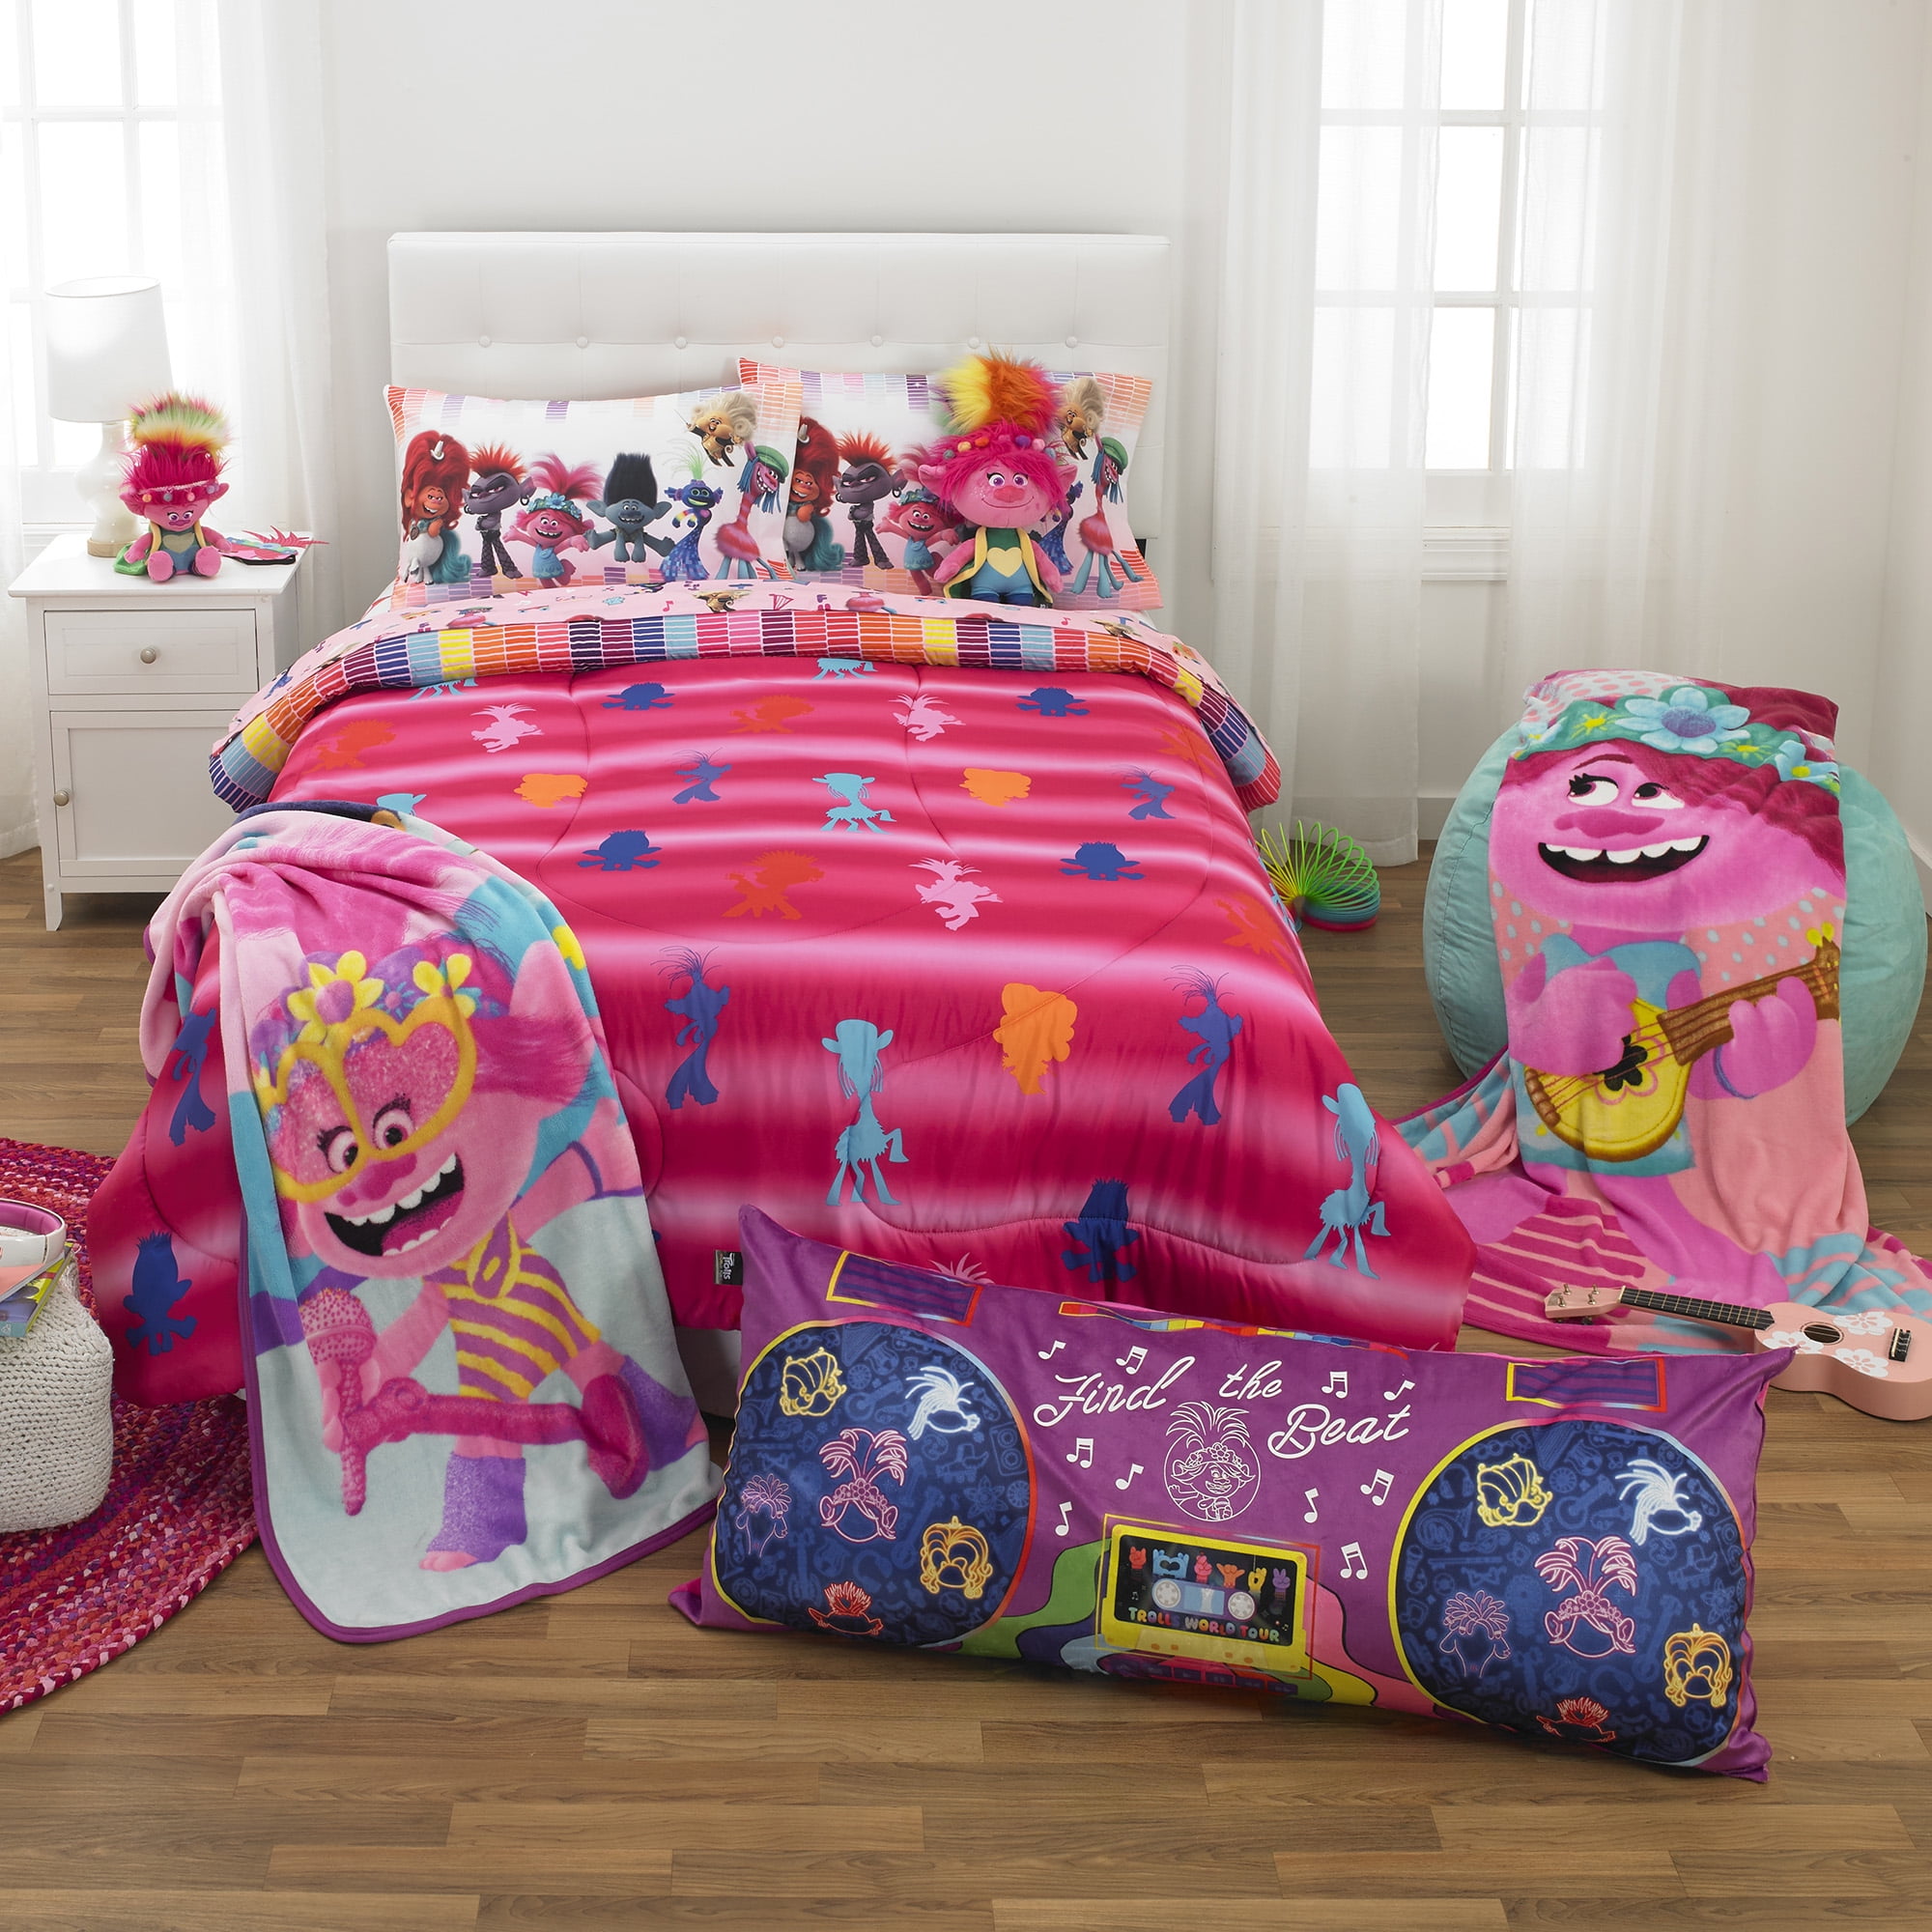 6pc TROLLS Movie Full/Double COMFORTER Pillow SHAM+SHEETS Set Bed Room In a Bag 